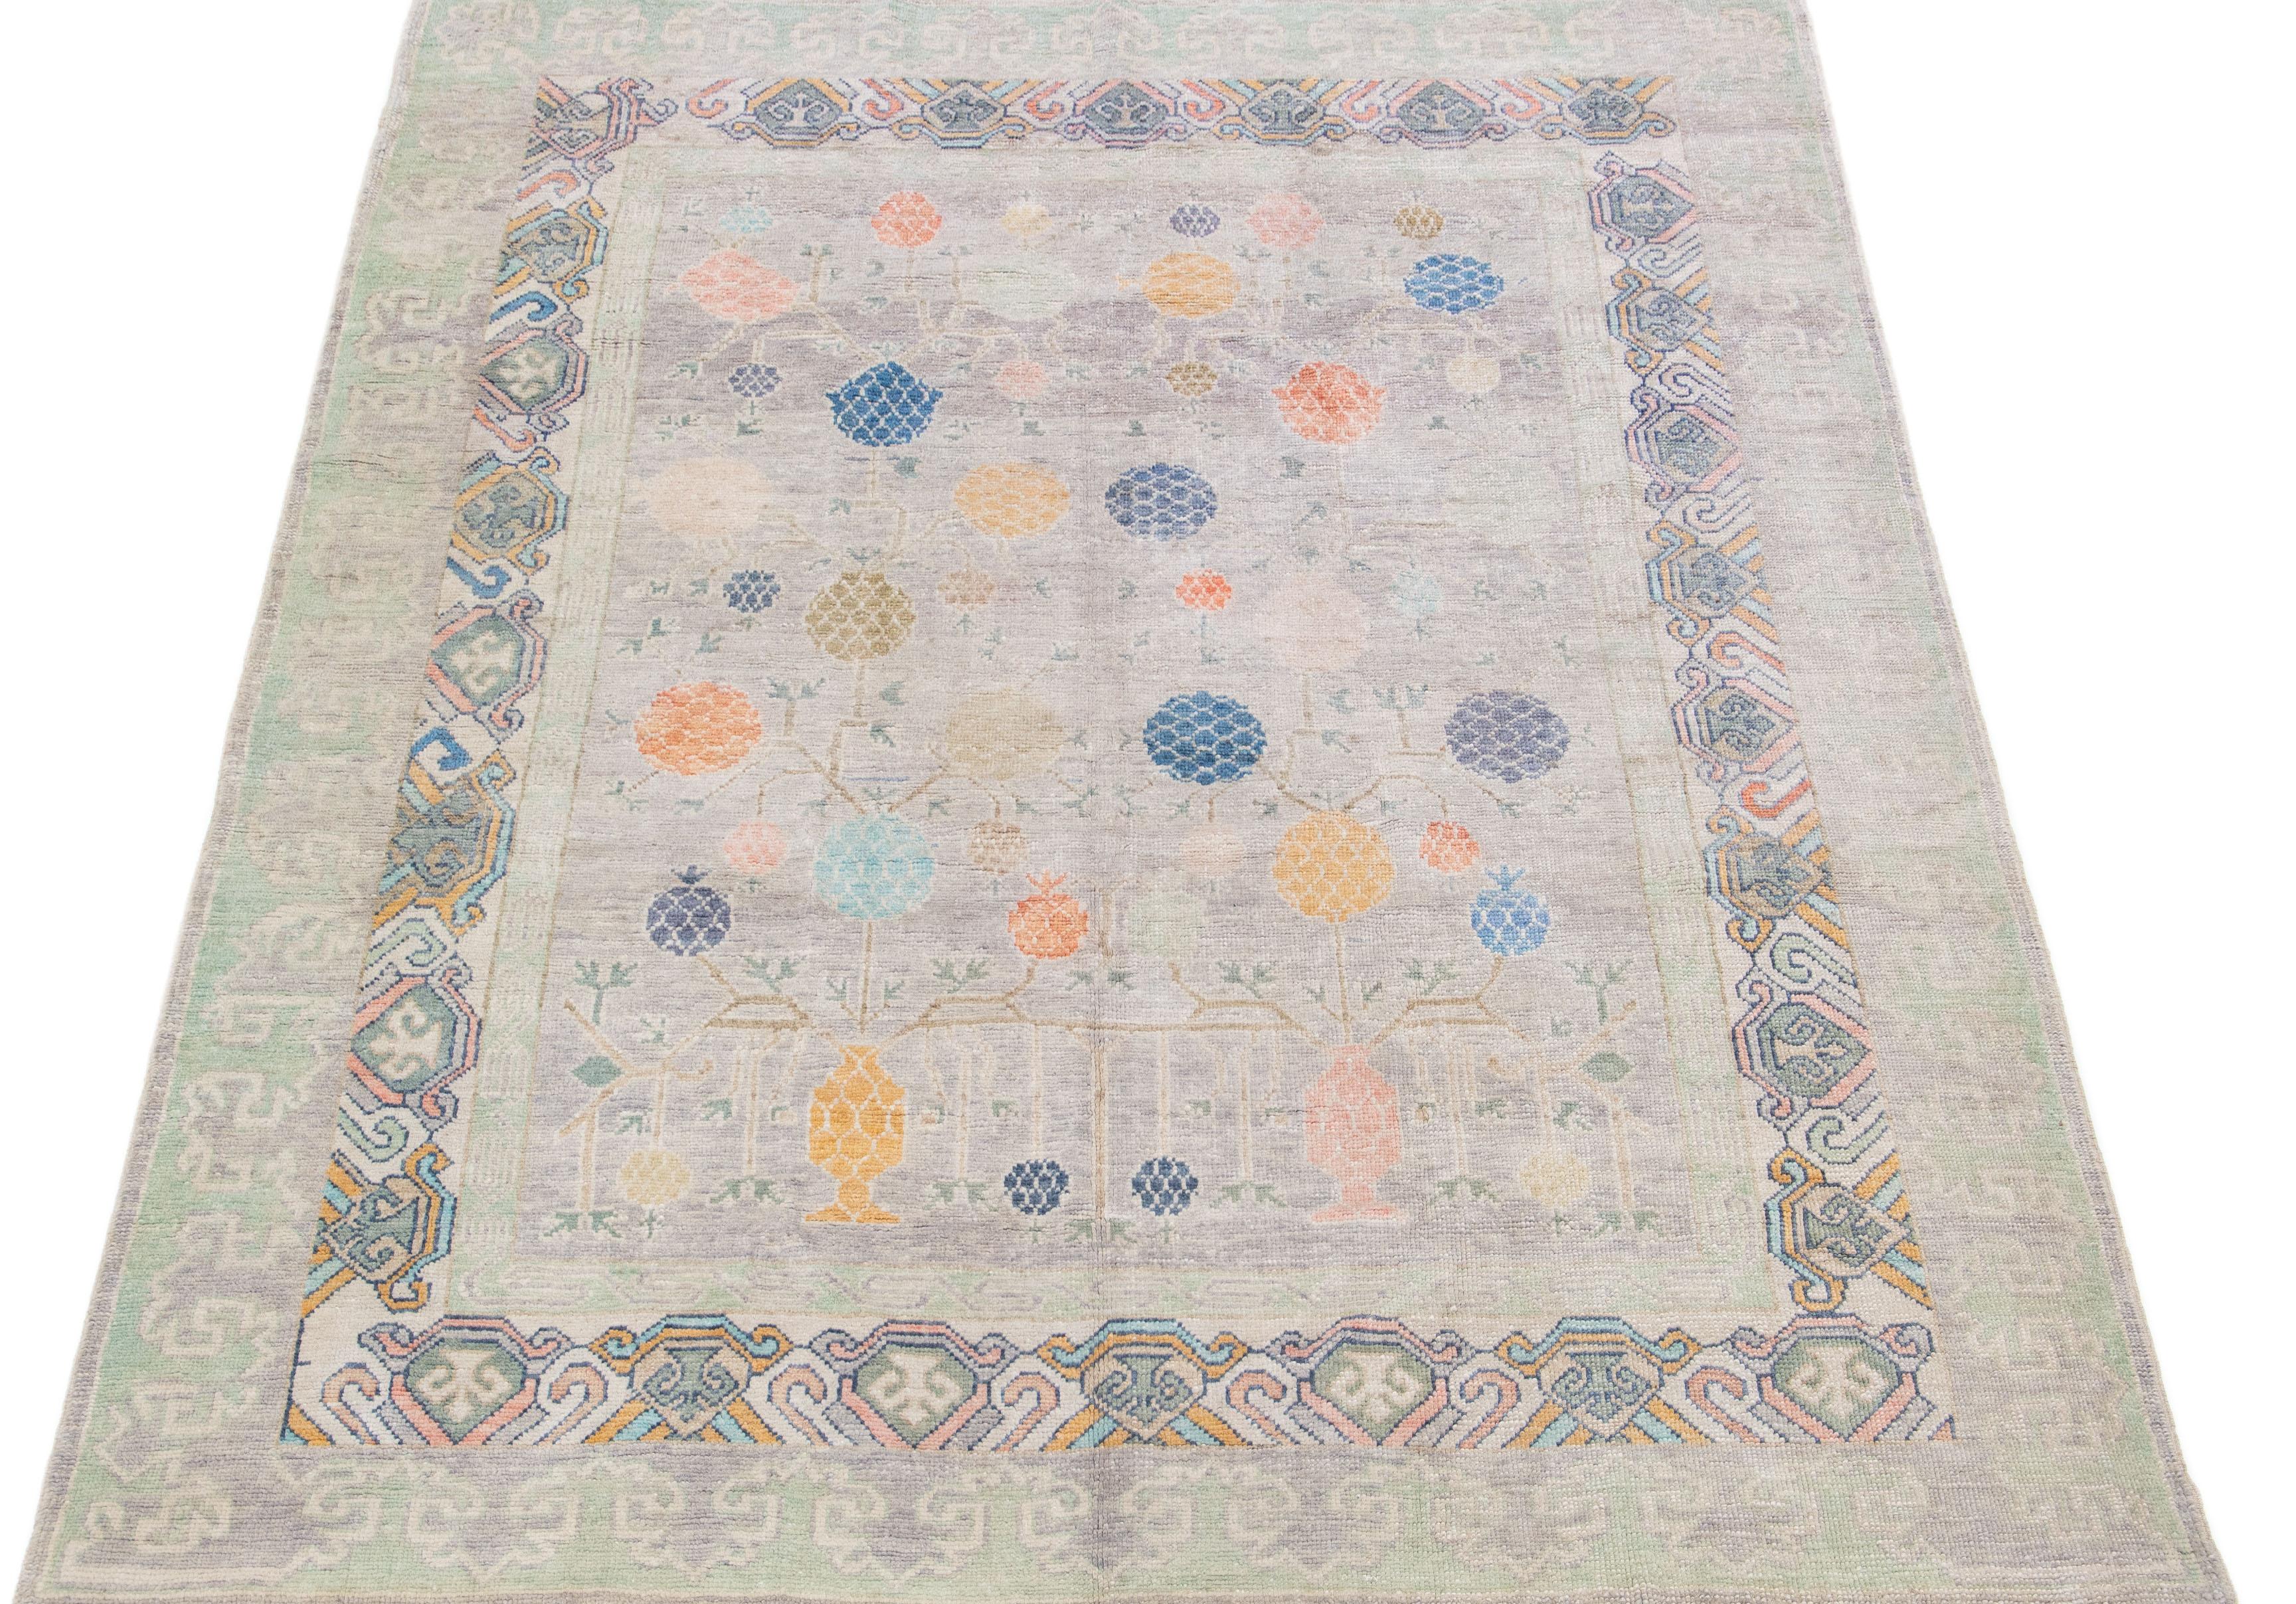 Beautiful modern Khotan-Style hand-knotted wool rug with a gray field. This piece has a green frame and multicolor accents in a gorgeous all-over floral pattern design.

This rug measures: 8'4